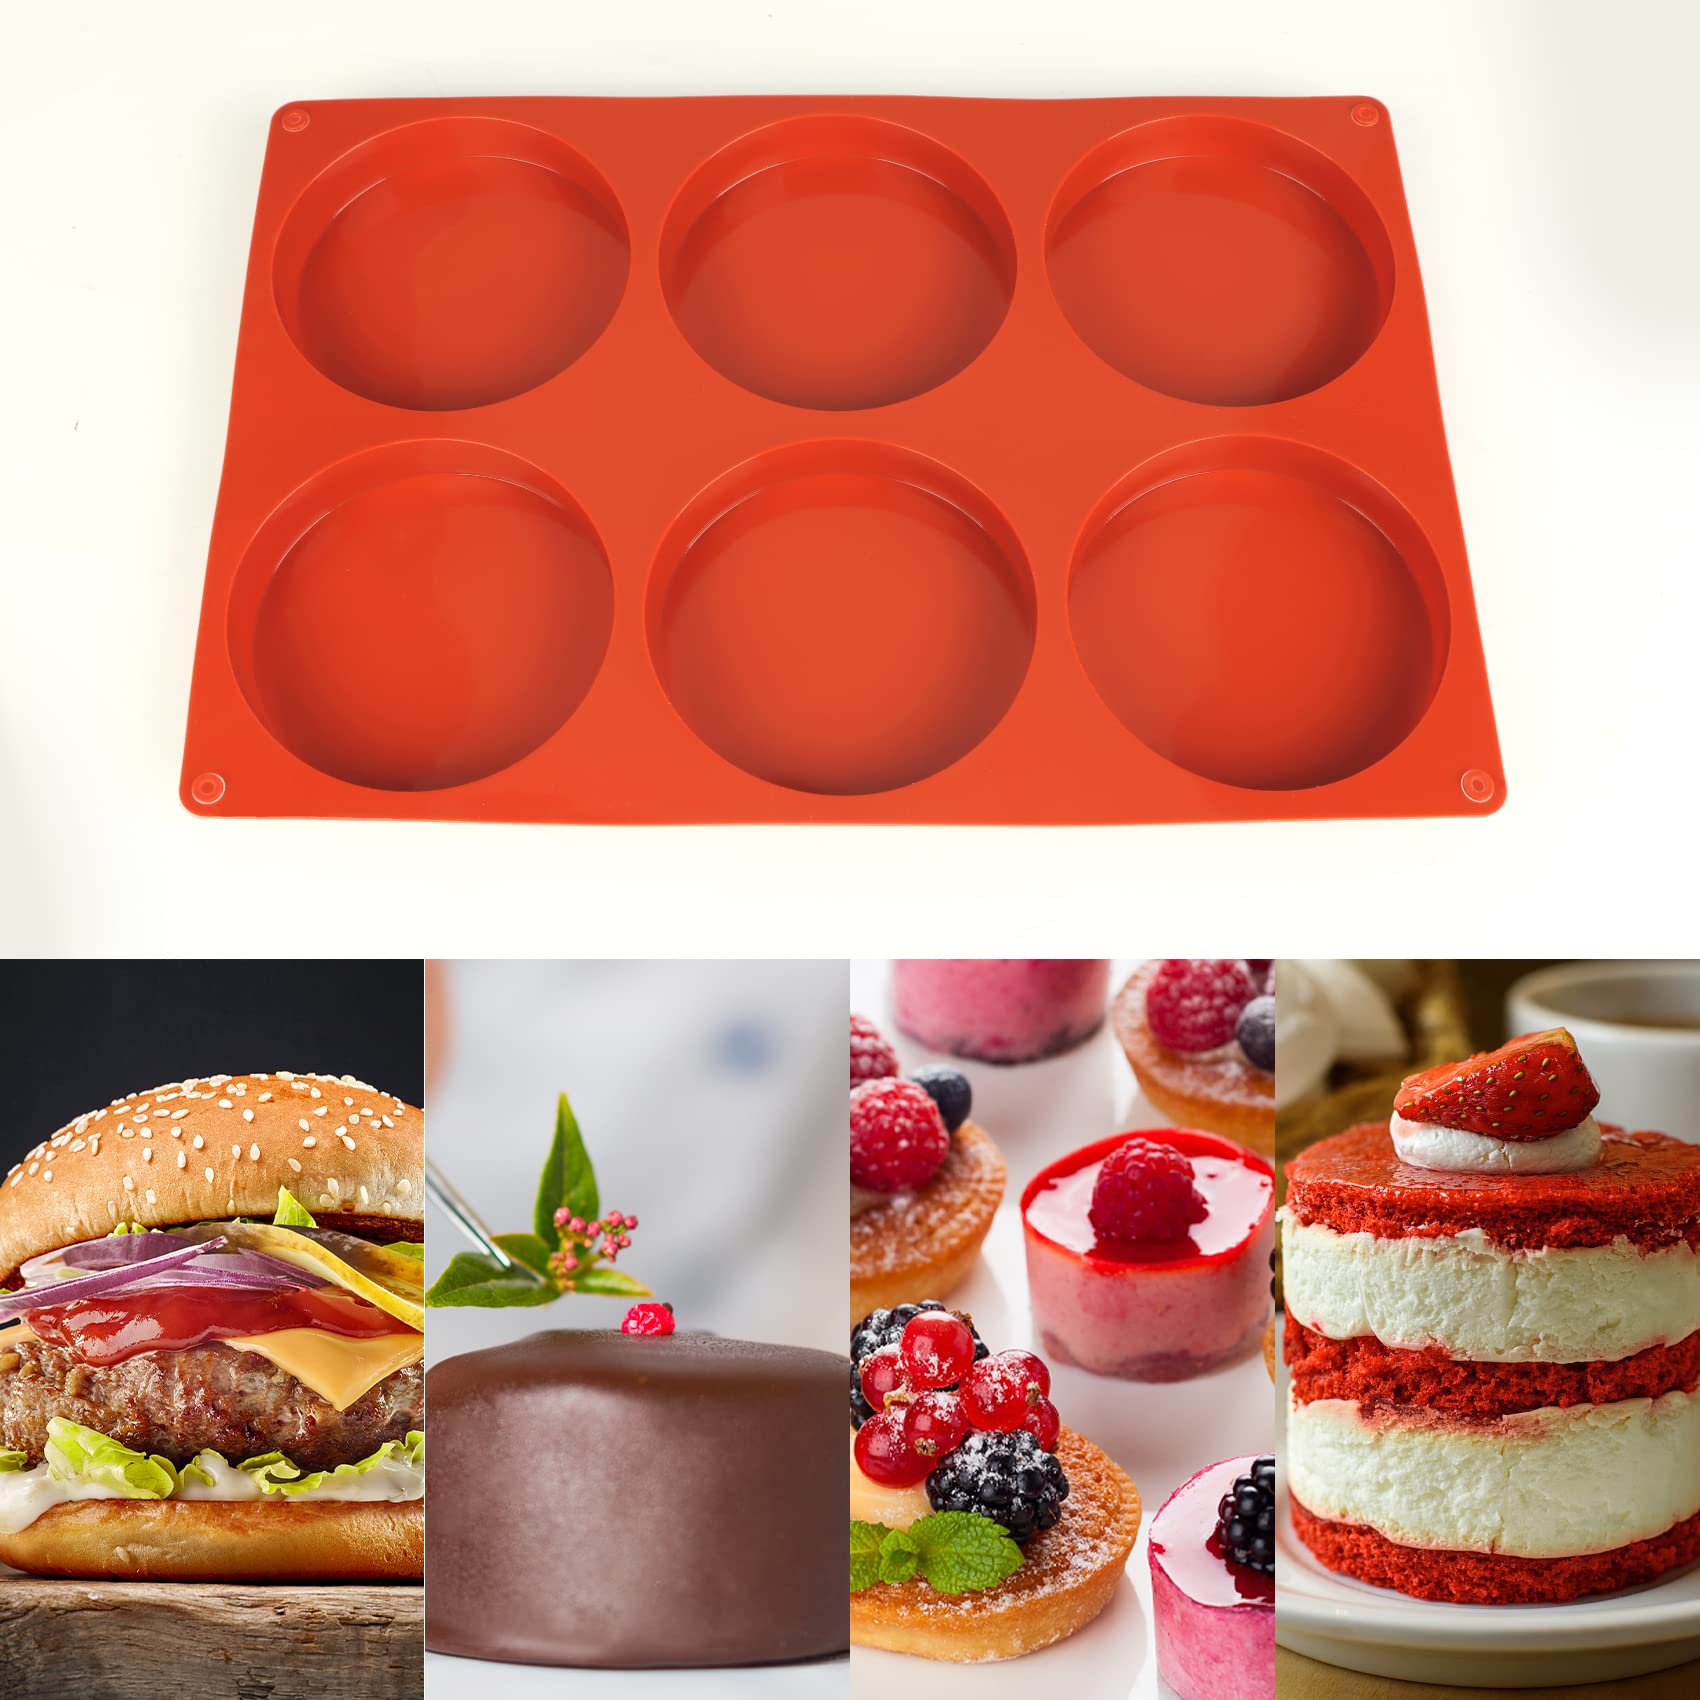 2 Pcs Large Silicone Molds for Baking, 6-Cavity Round Silicone Baking Mold, Non-Stick 4” Baking Disc Molds for Whoopie Pie, Egg Pan,Muffin, Candy, Soap, Hamburger, Resin Coasters (Red)